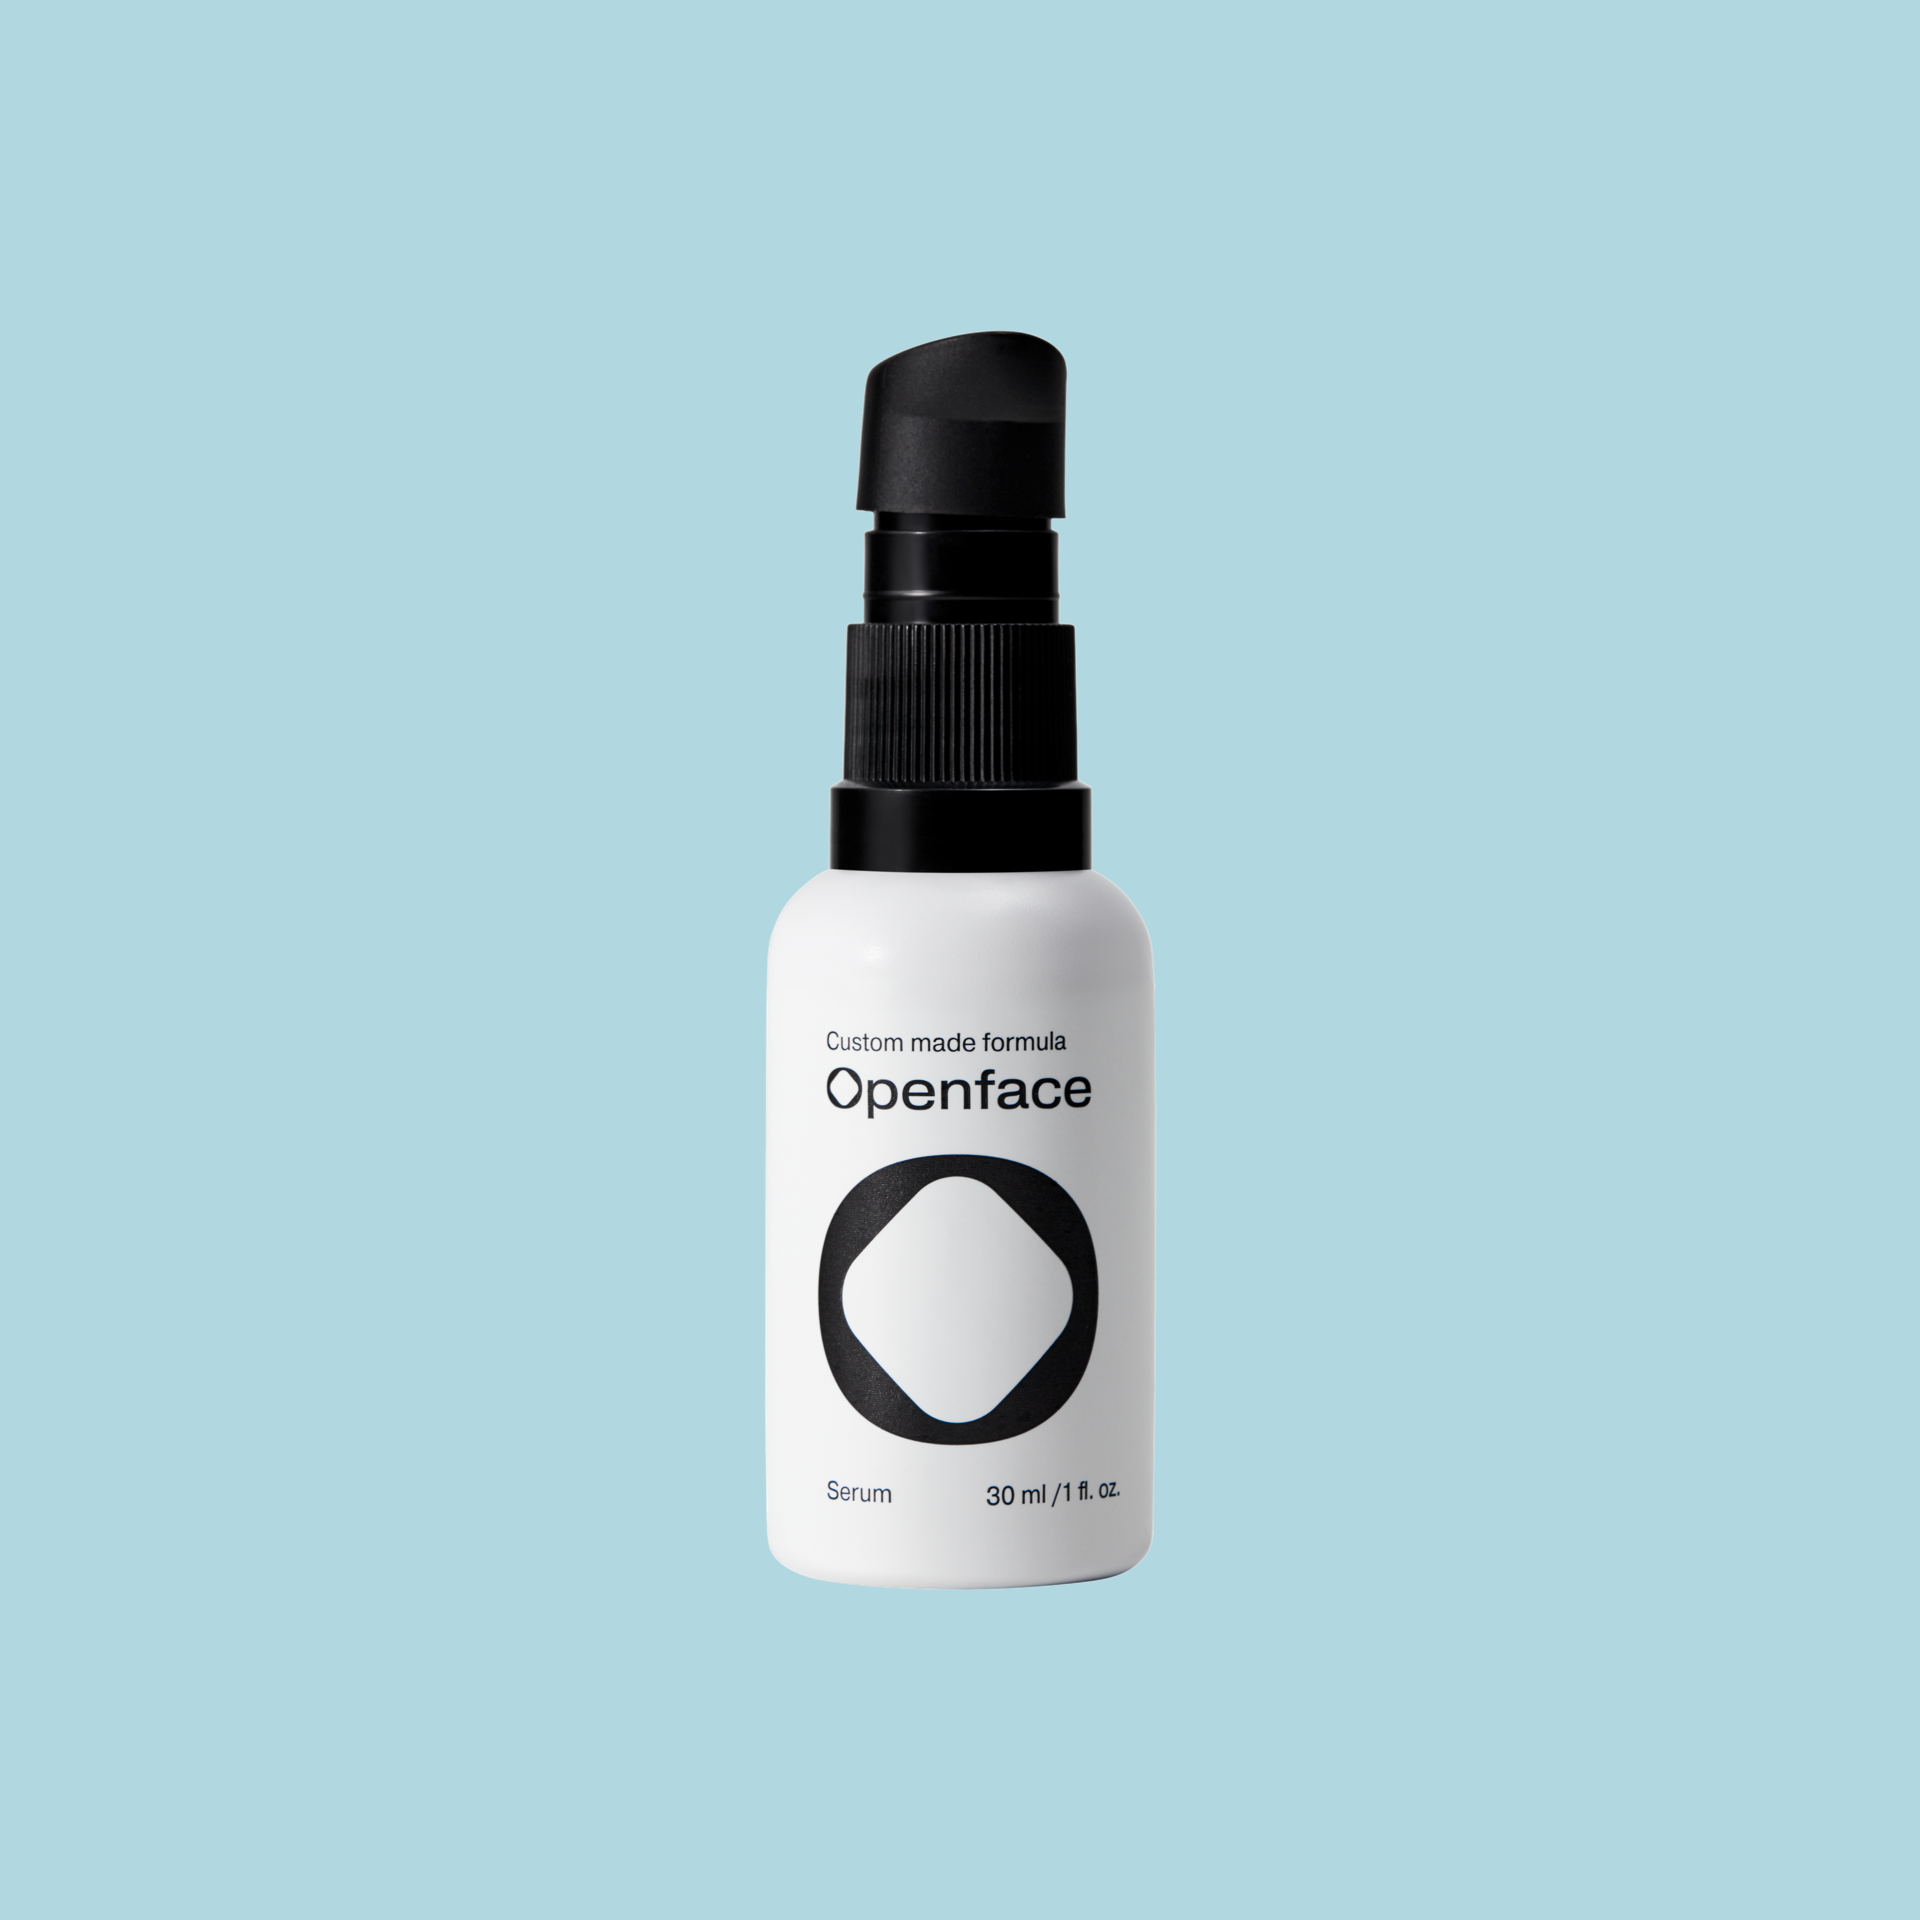 Firming and Brightening Formula